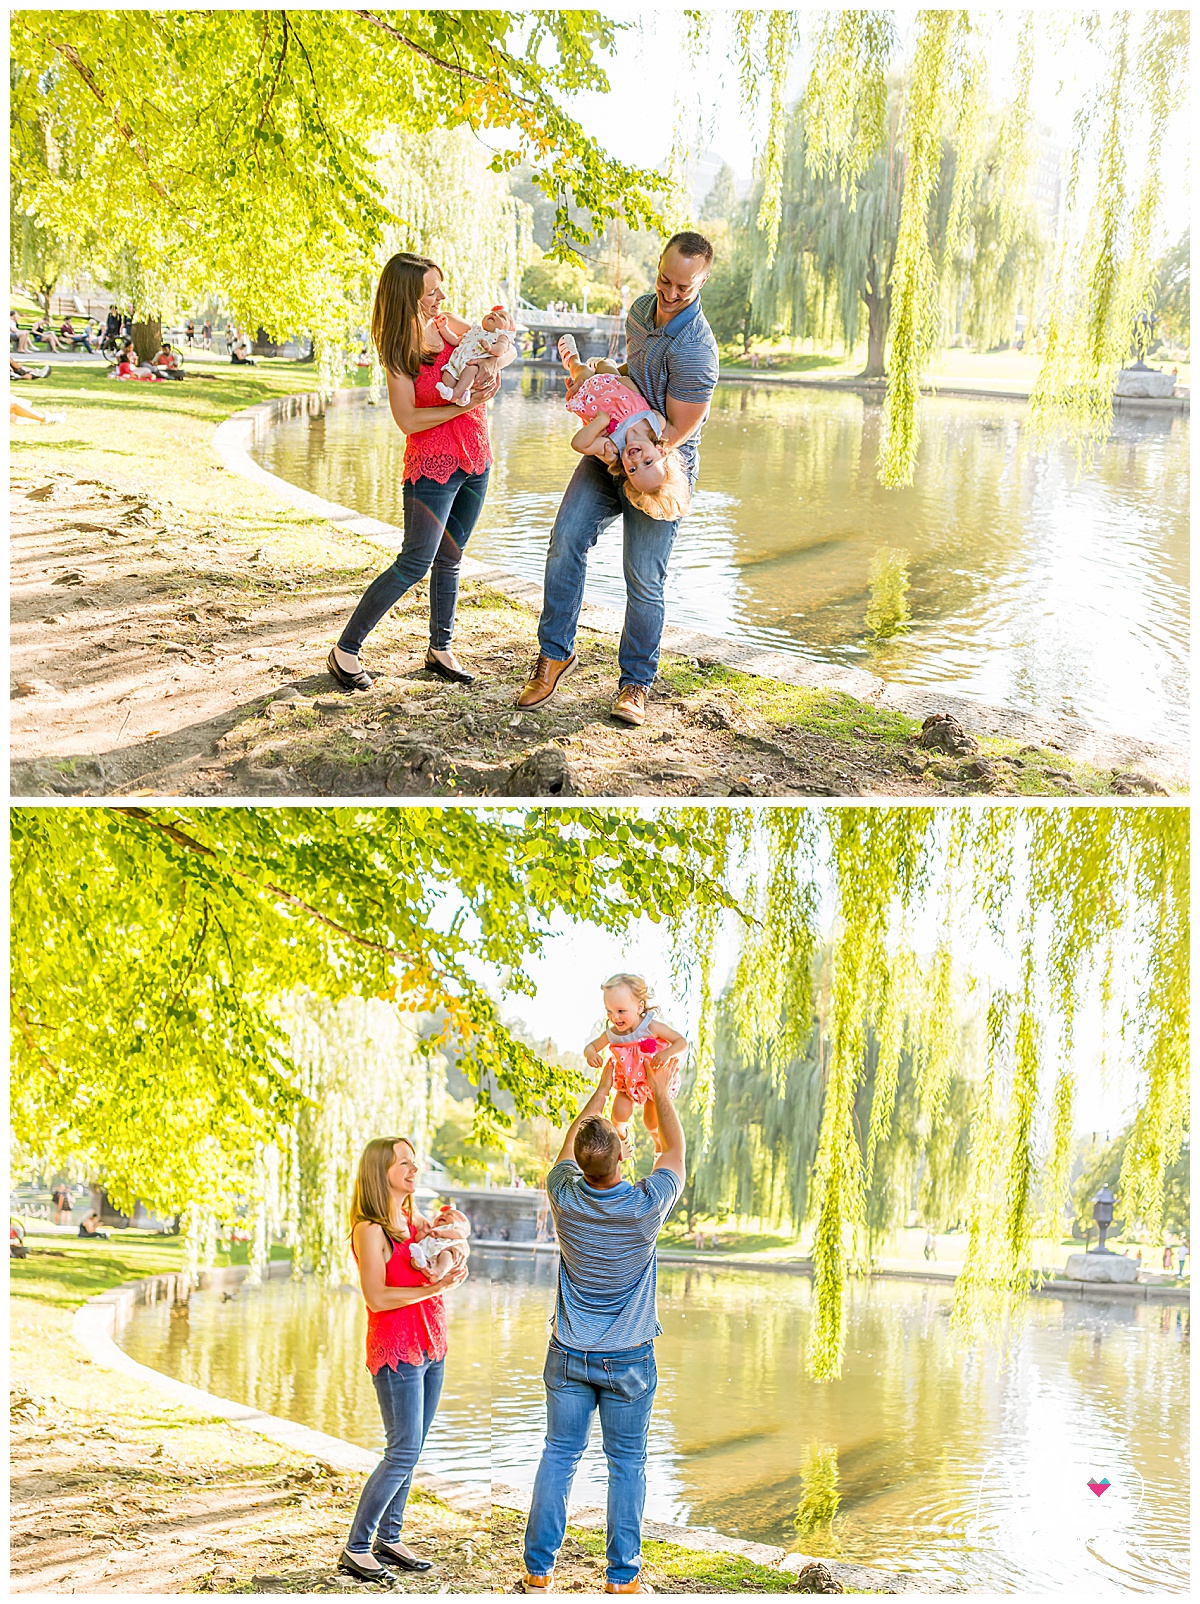 Tips for a Photo Session with Children